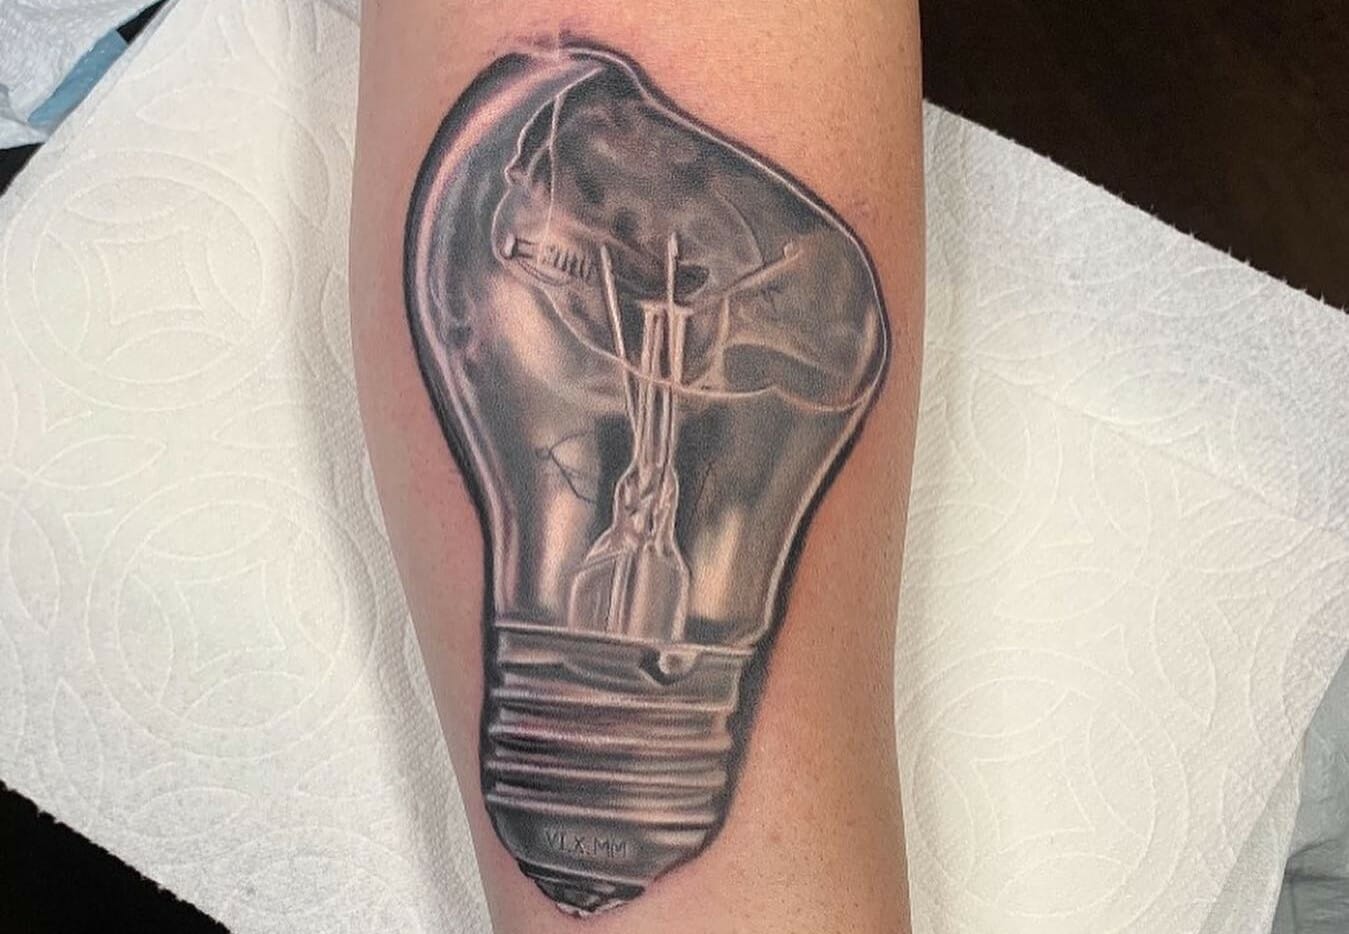 10 Best Electrician Tattoo Ideas That Will Blow Your Mind!

+2023